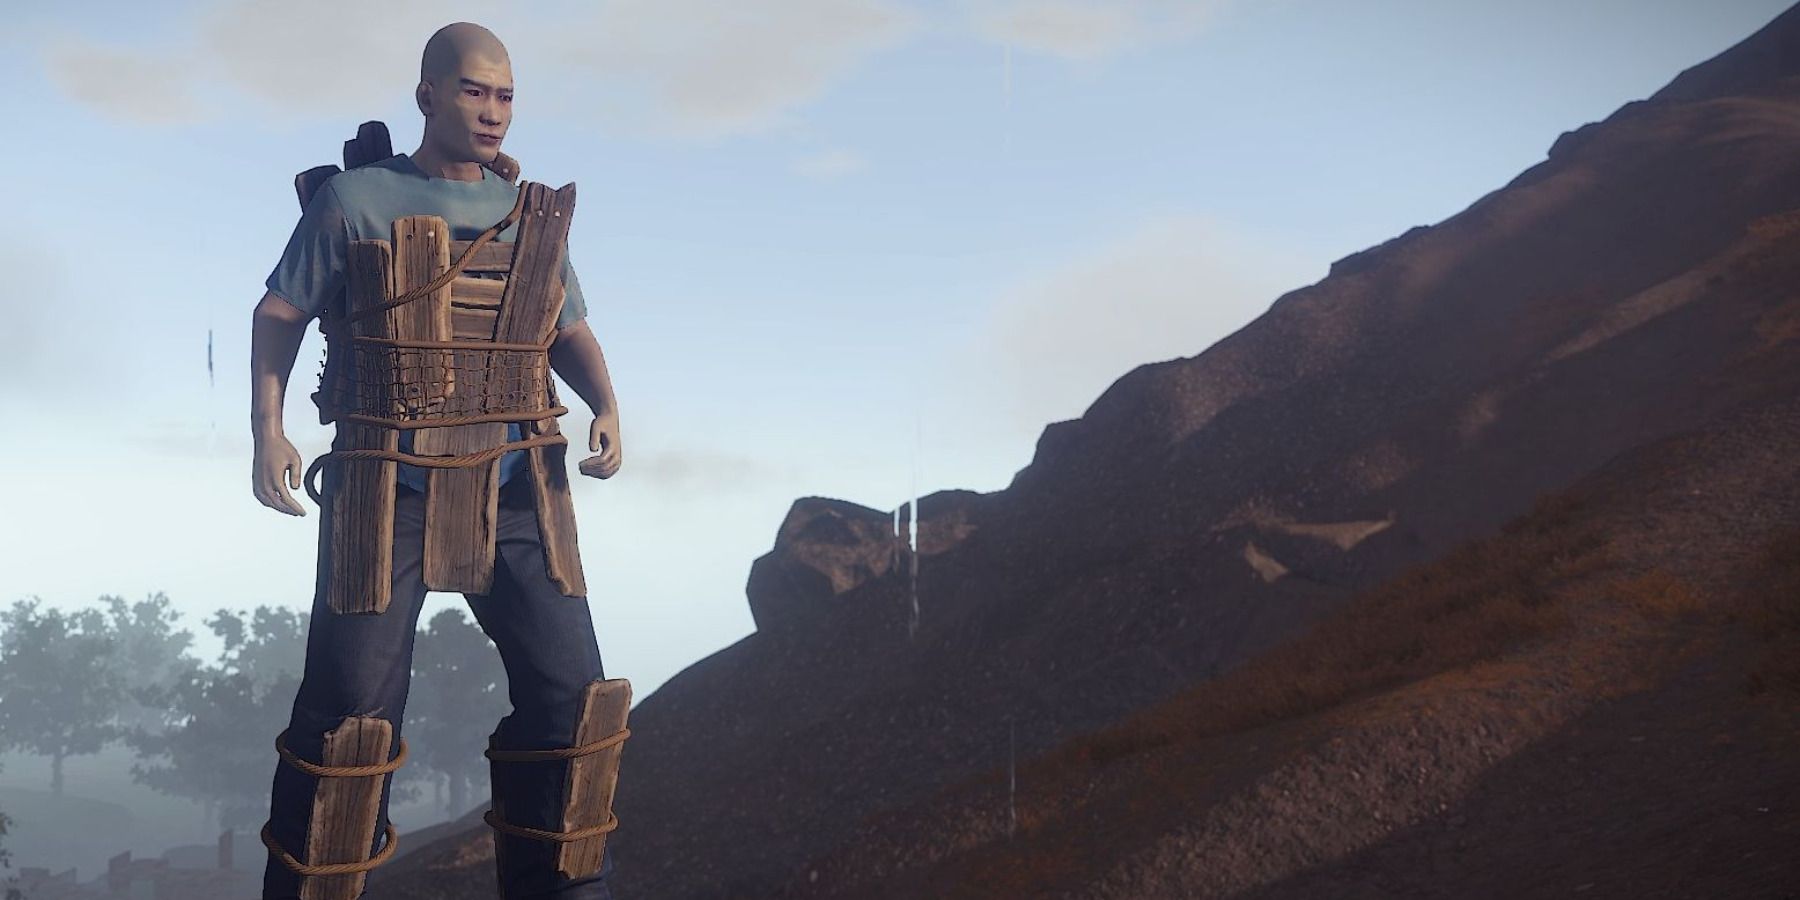 Player using the Wooden Armor from Rust.